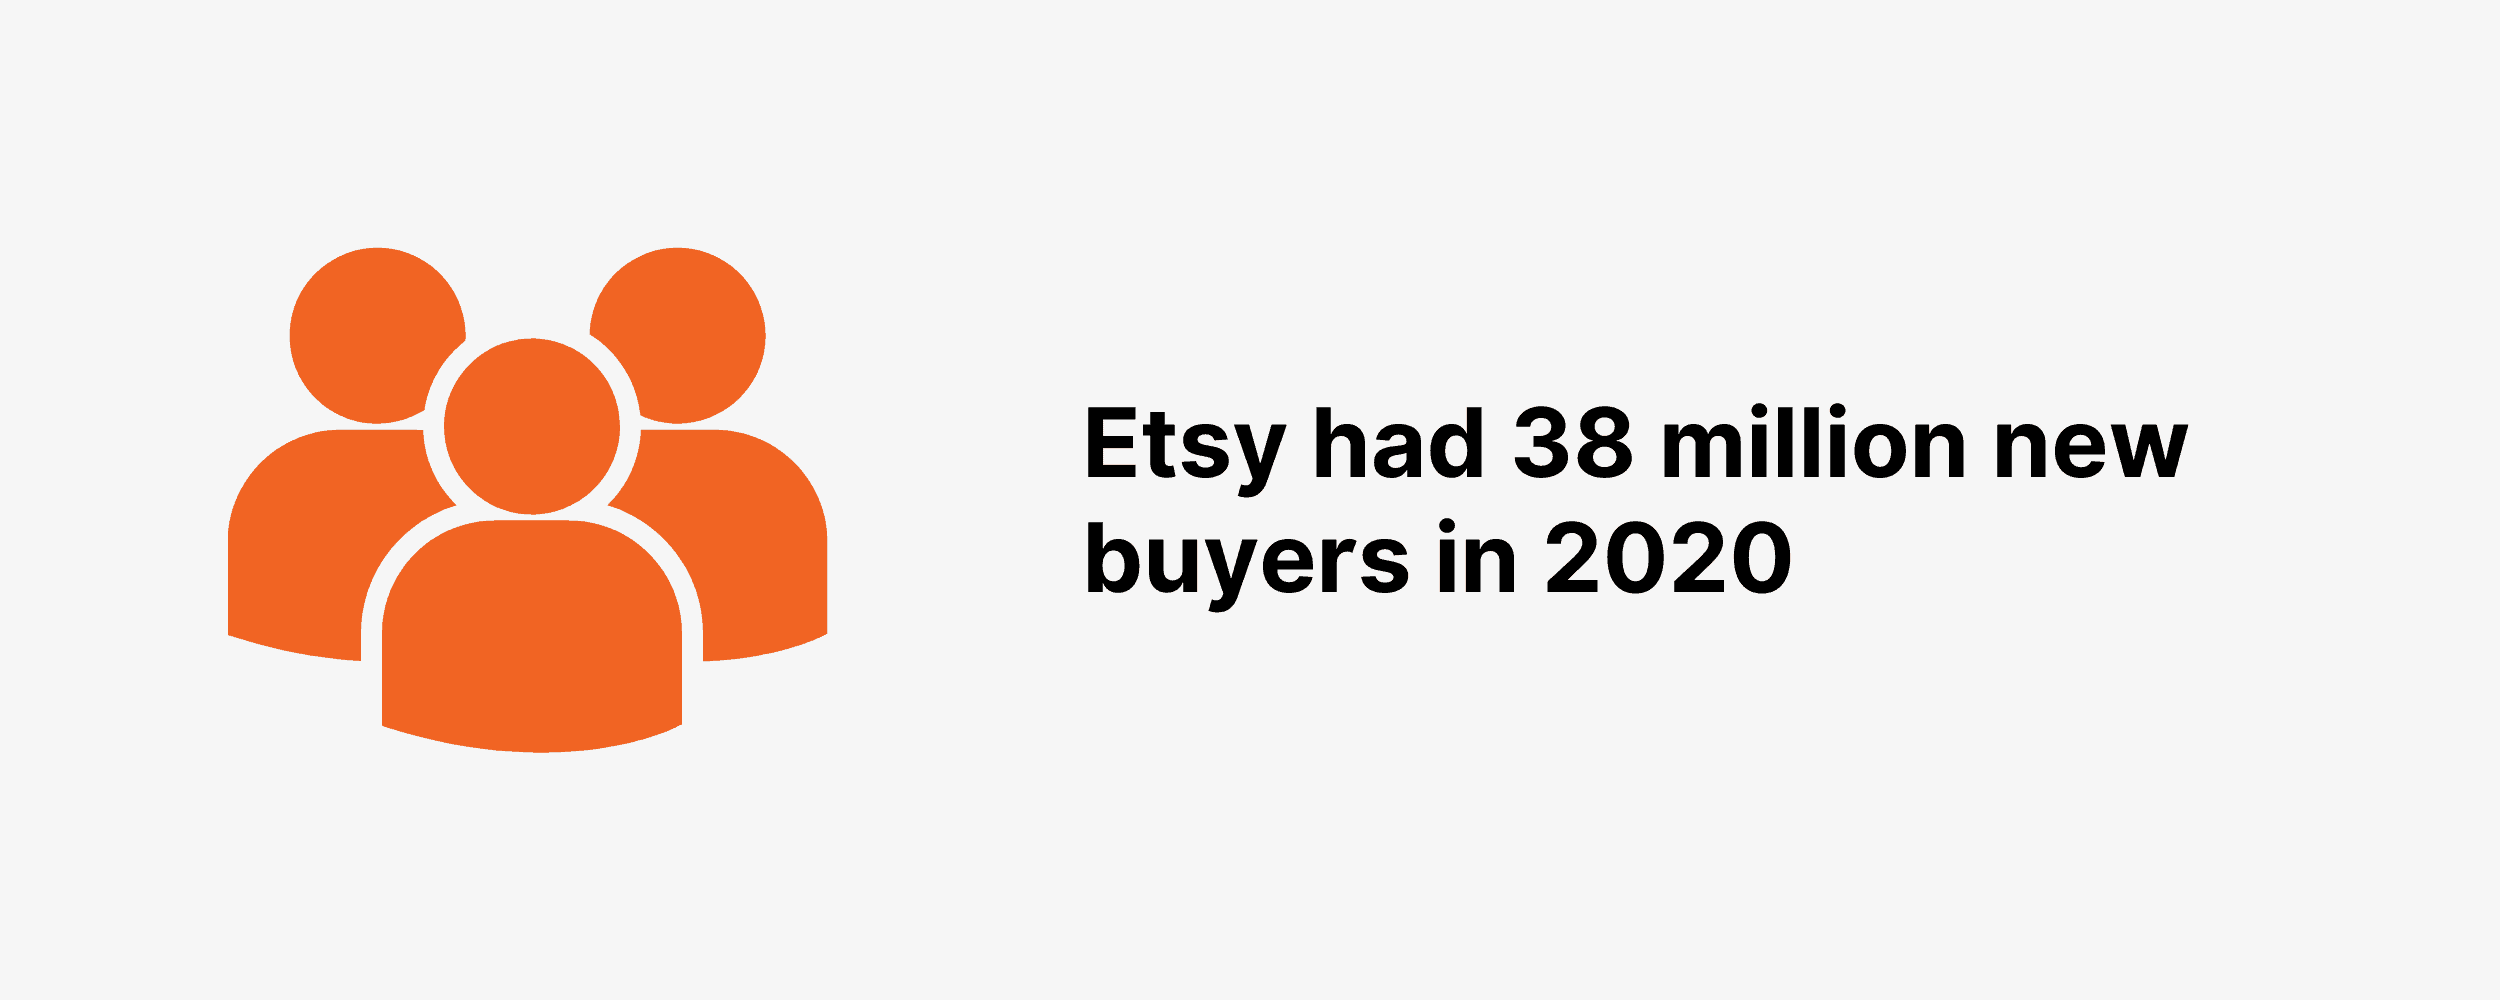 Etsy had 38 million new buyers in 2020